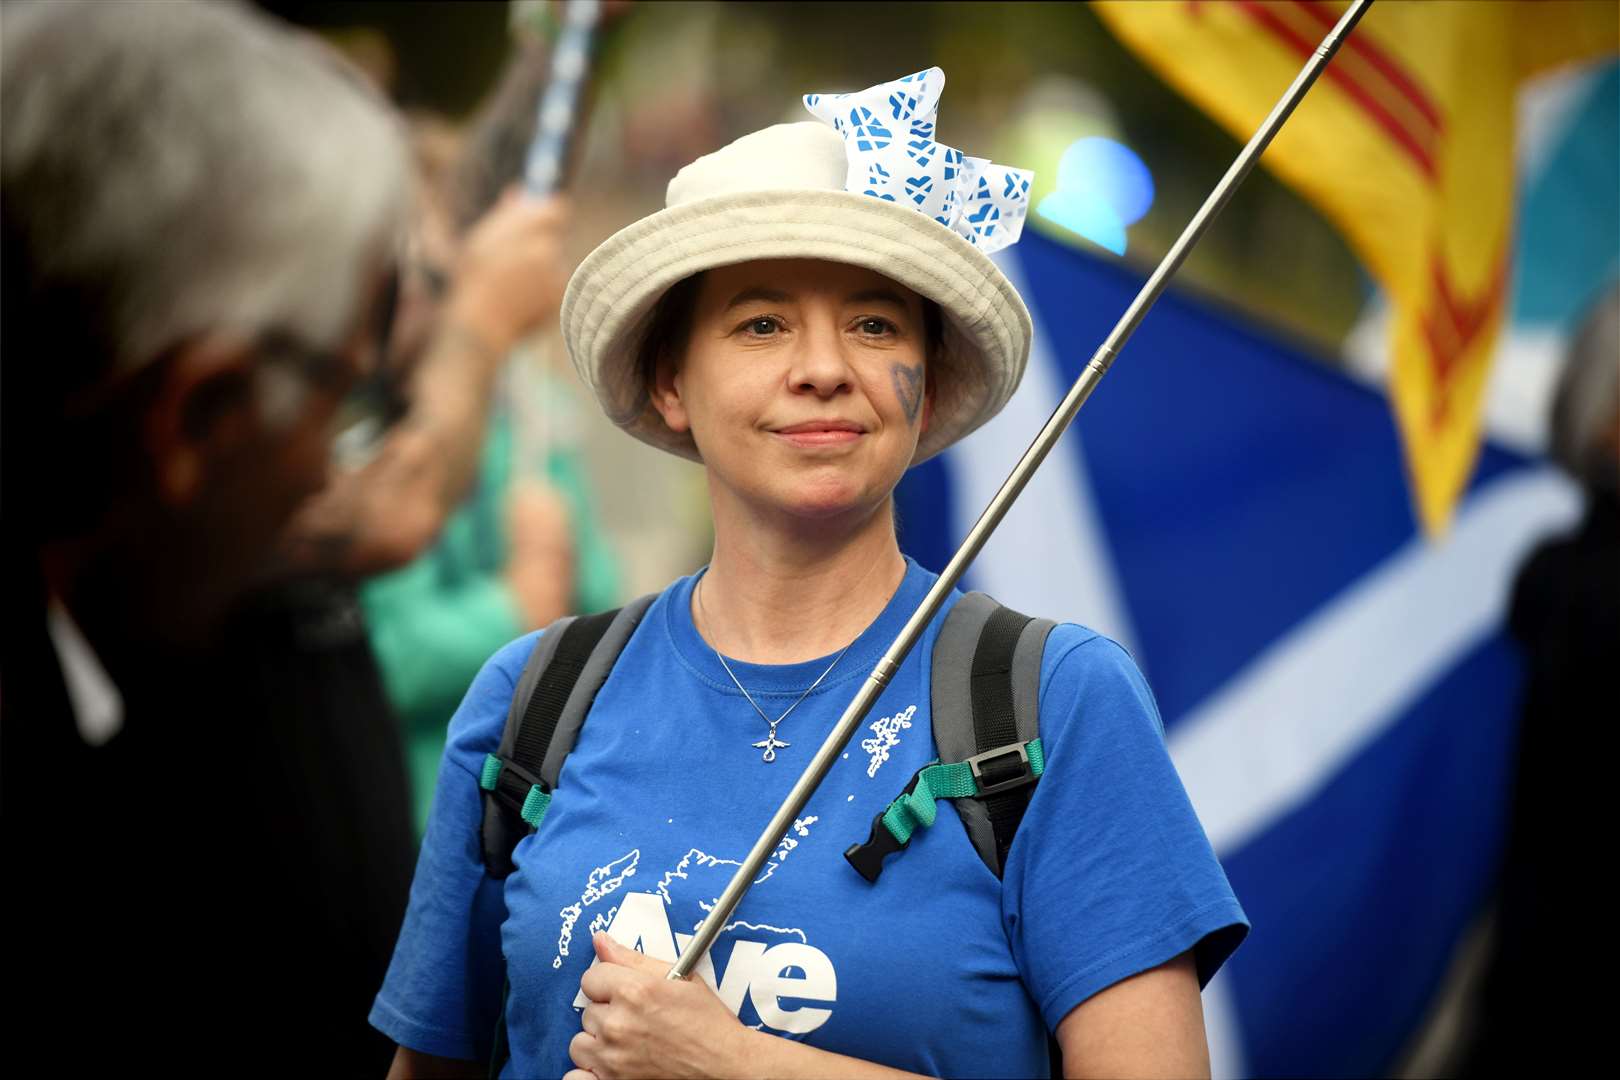 Waiting to join the march. Picture: James Mackenzie.